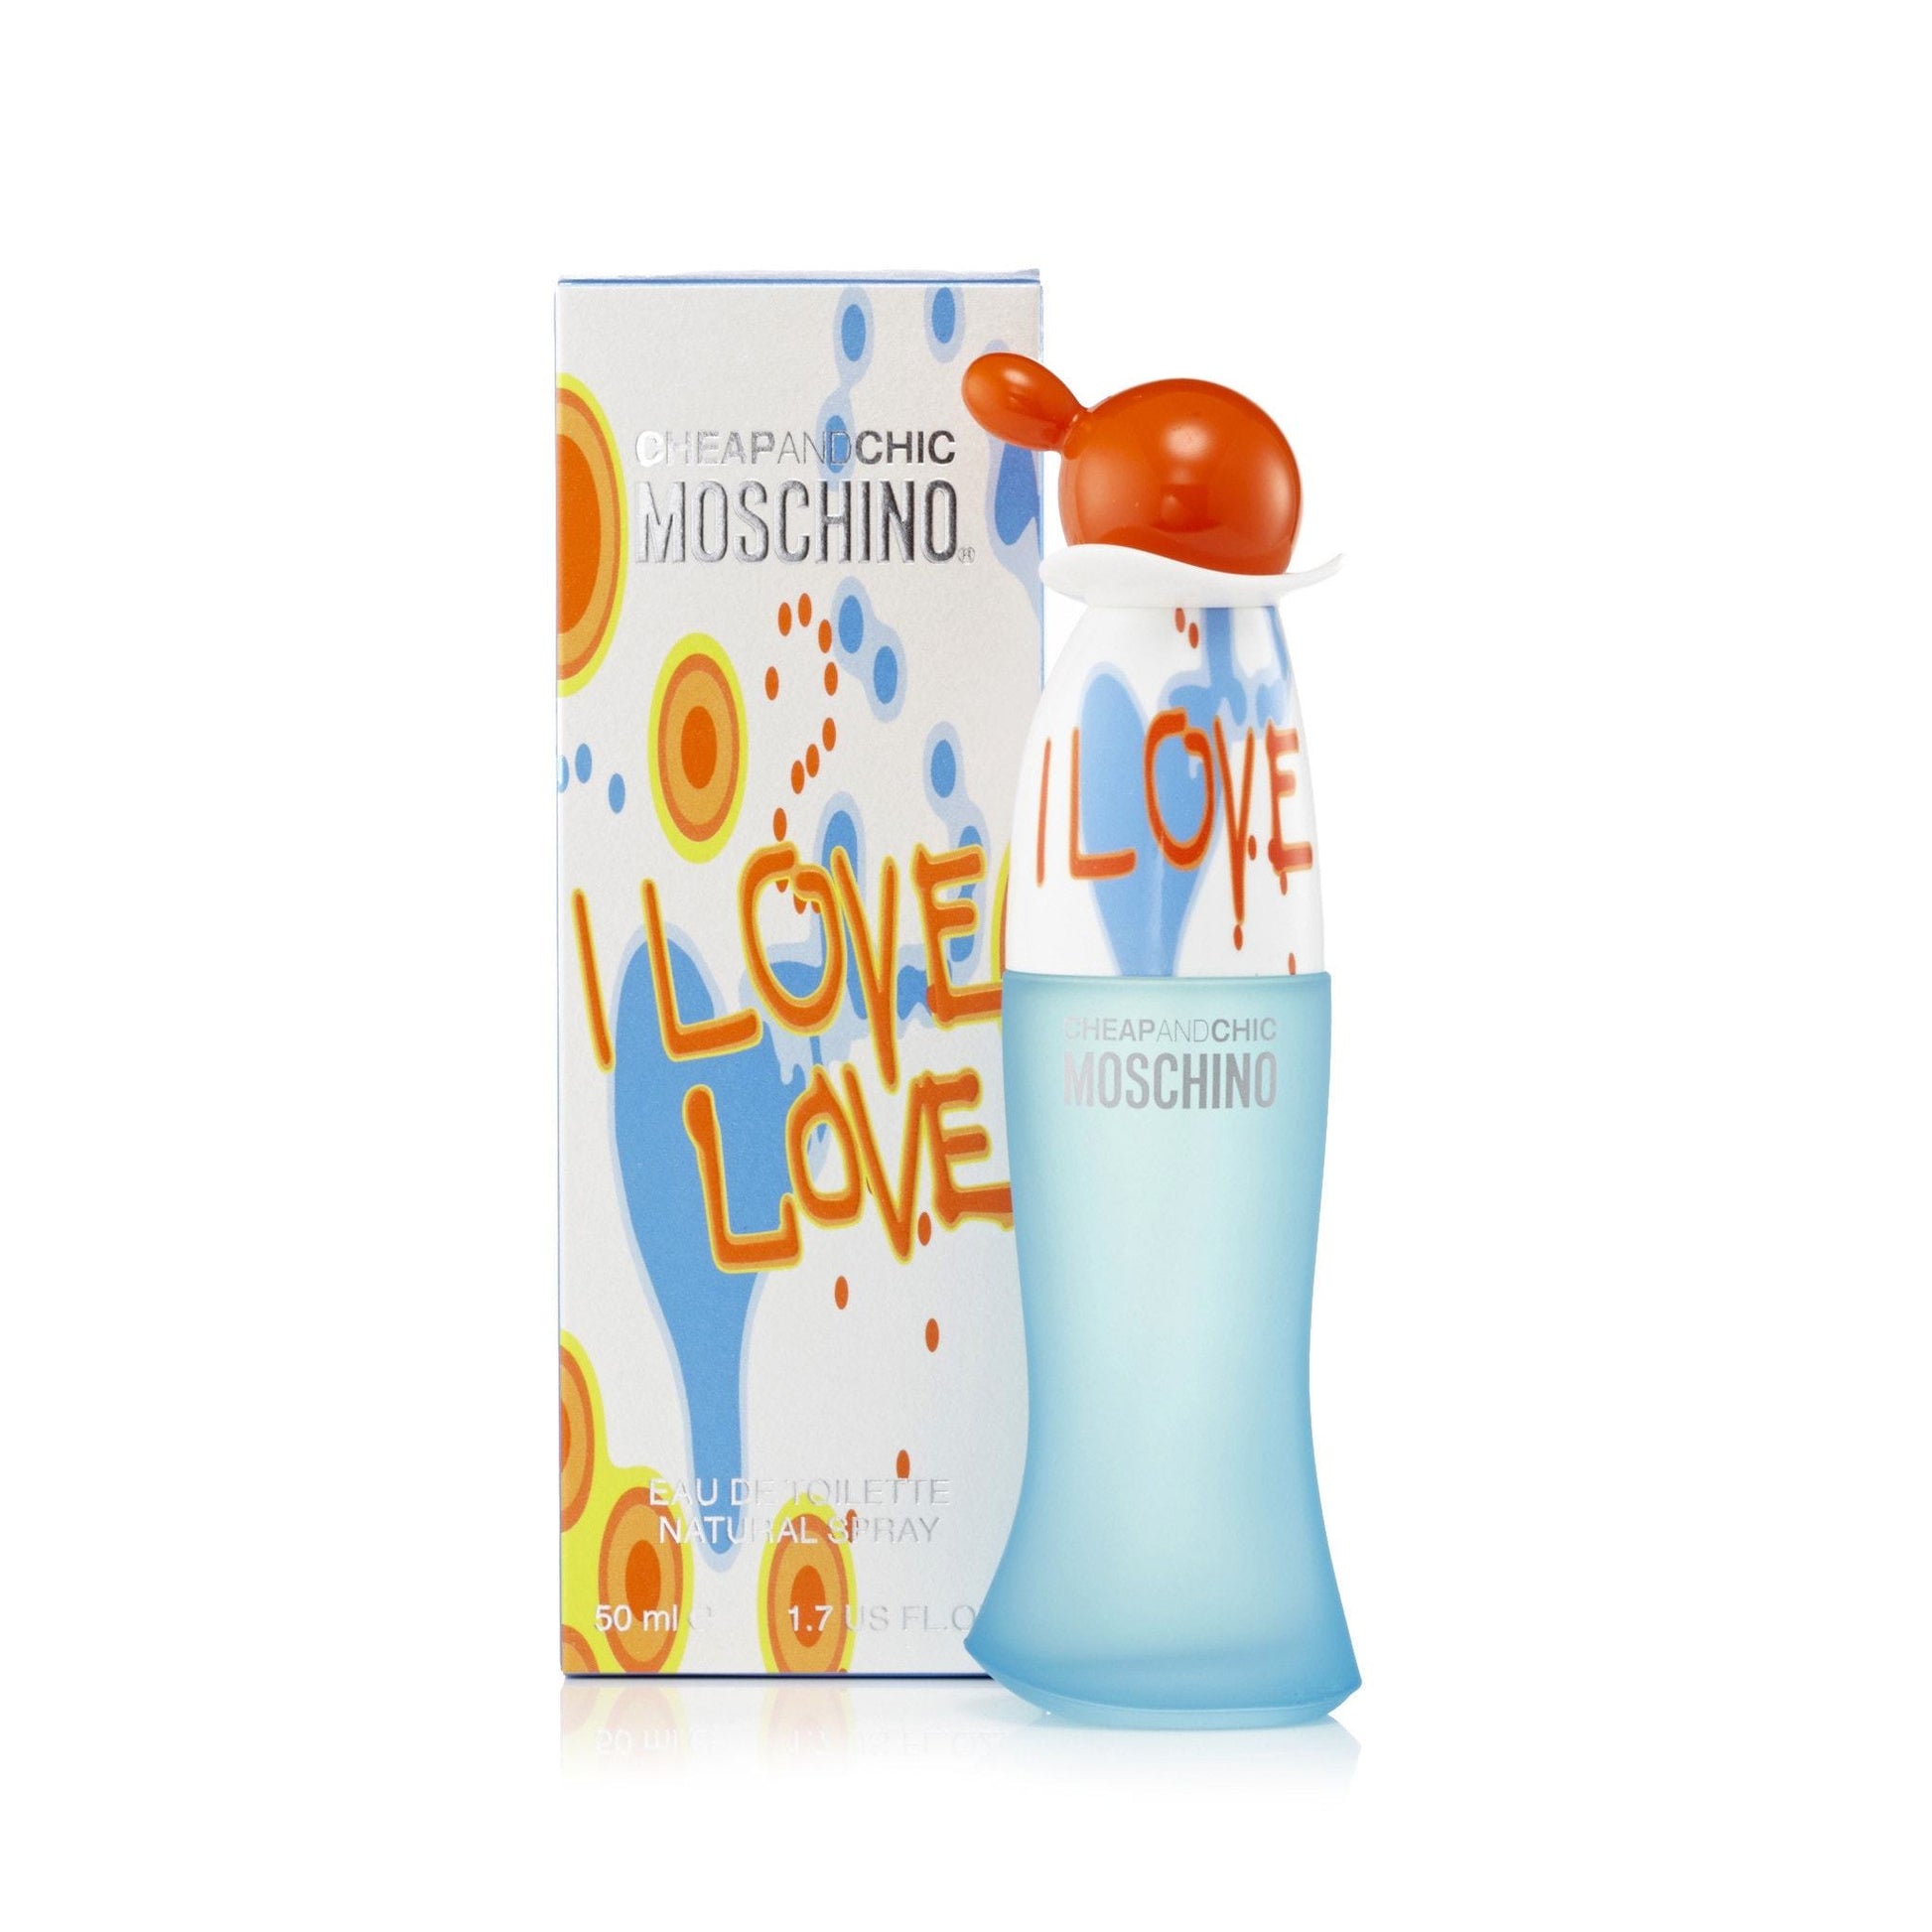 I Love Love Eau de Toilette Spray for Women by Moschino, Product image 2